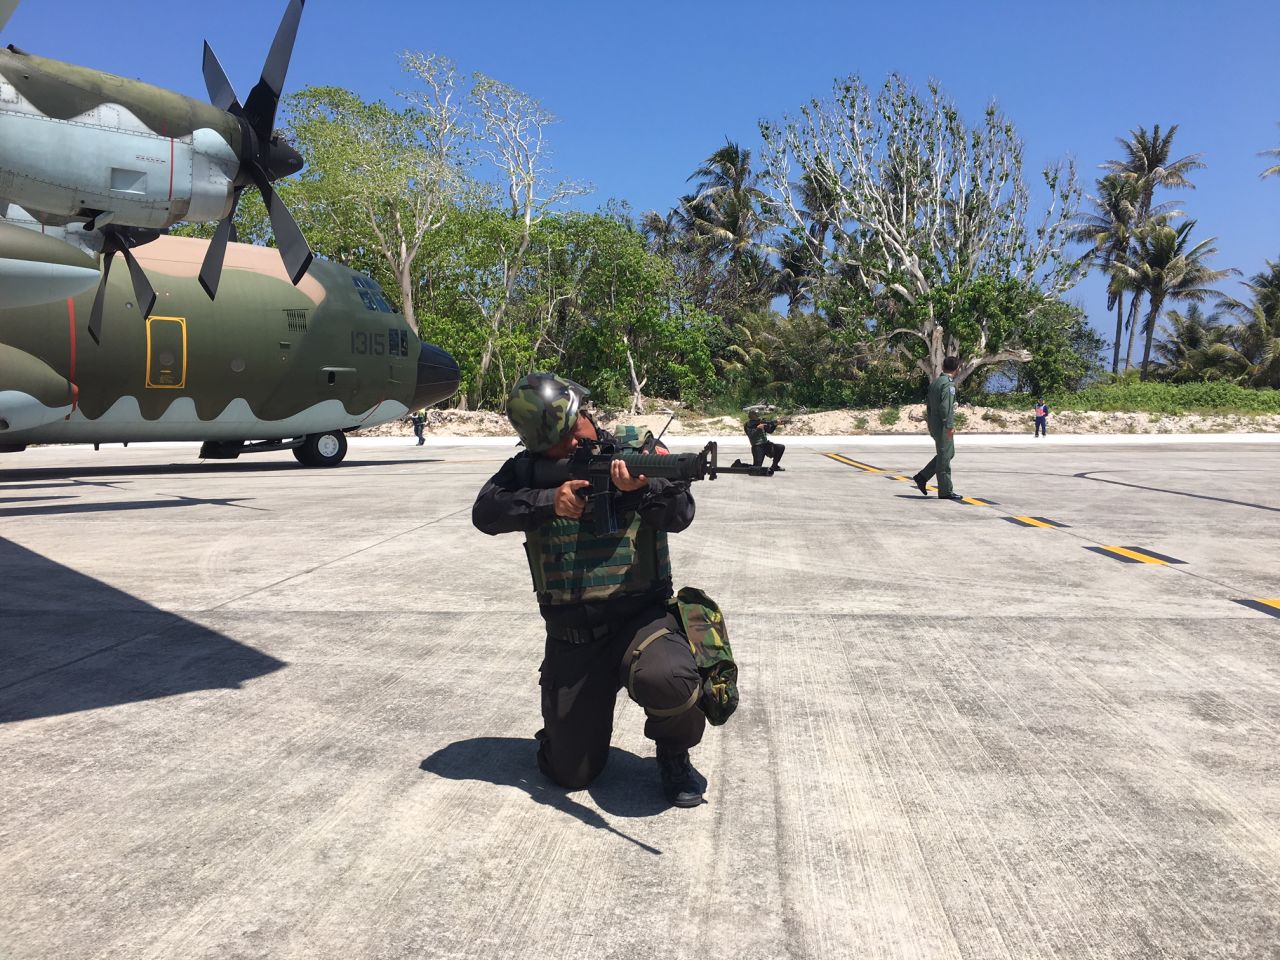 Uniformed Taiwan troops posed with rifles for journalists arriving on Taiping Island aboard a military C130 cargo plane March 23, 2016.   Outgoing Taiwan president Ma Ying-jeou says he wants to transform Taiping into "an island for peace and rescue operations." 